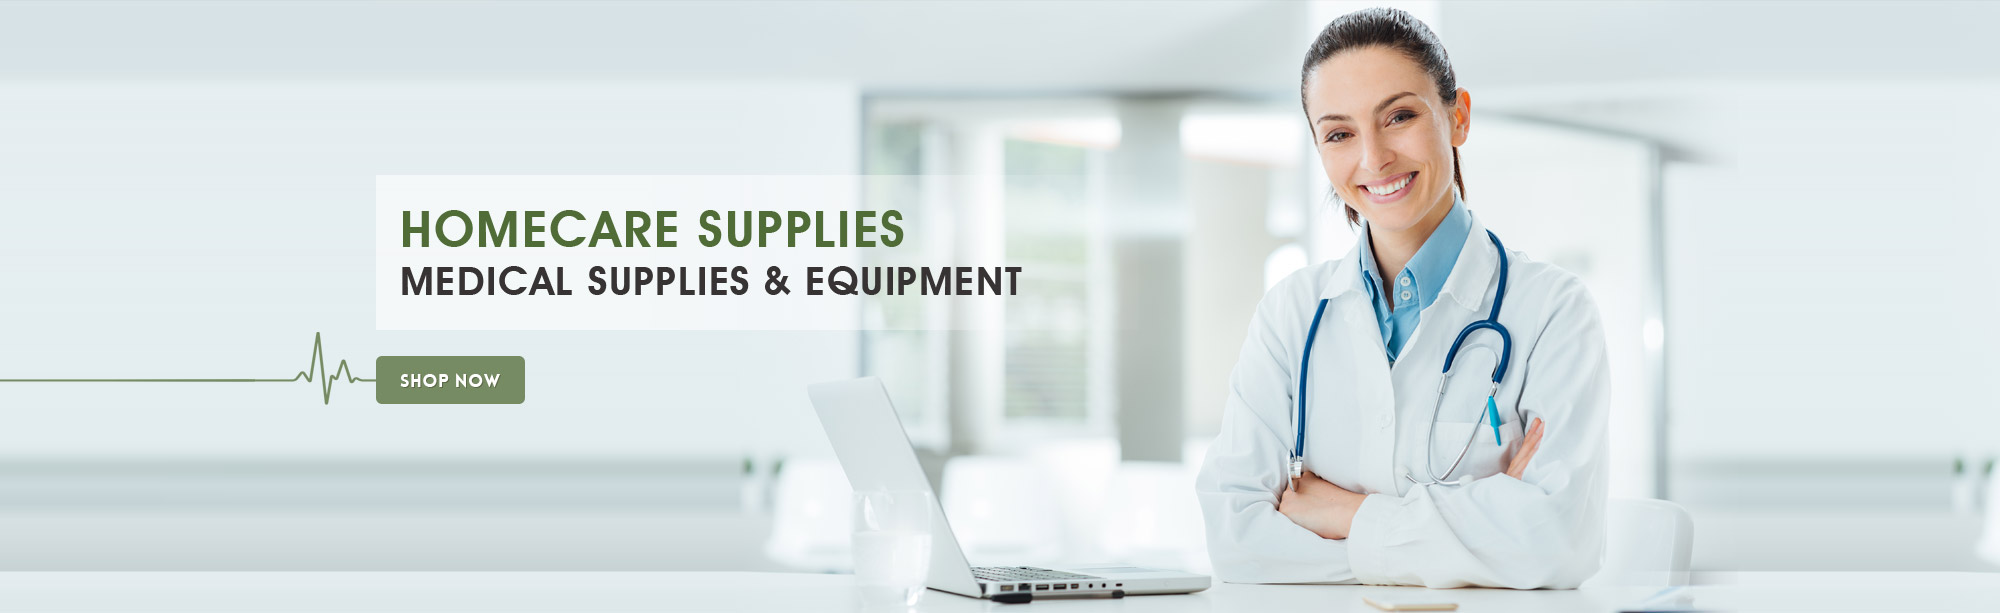 Home Equipment and Supplies